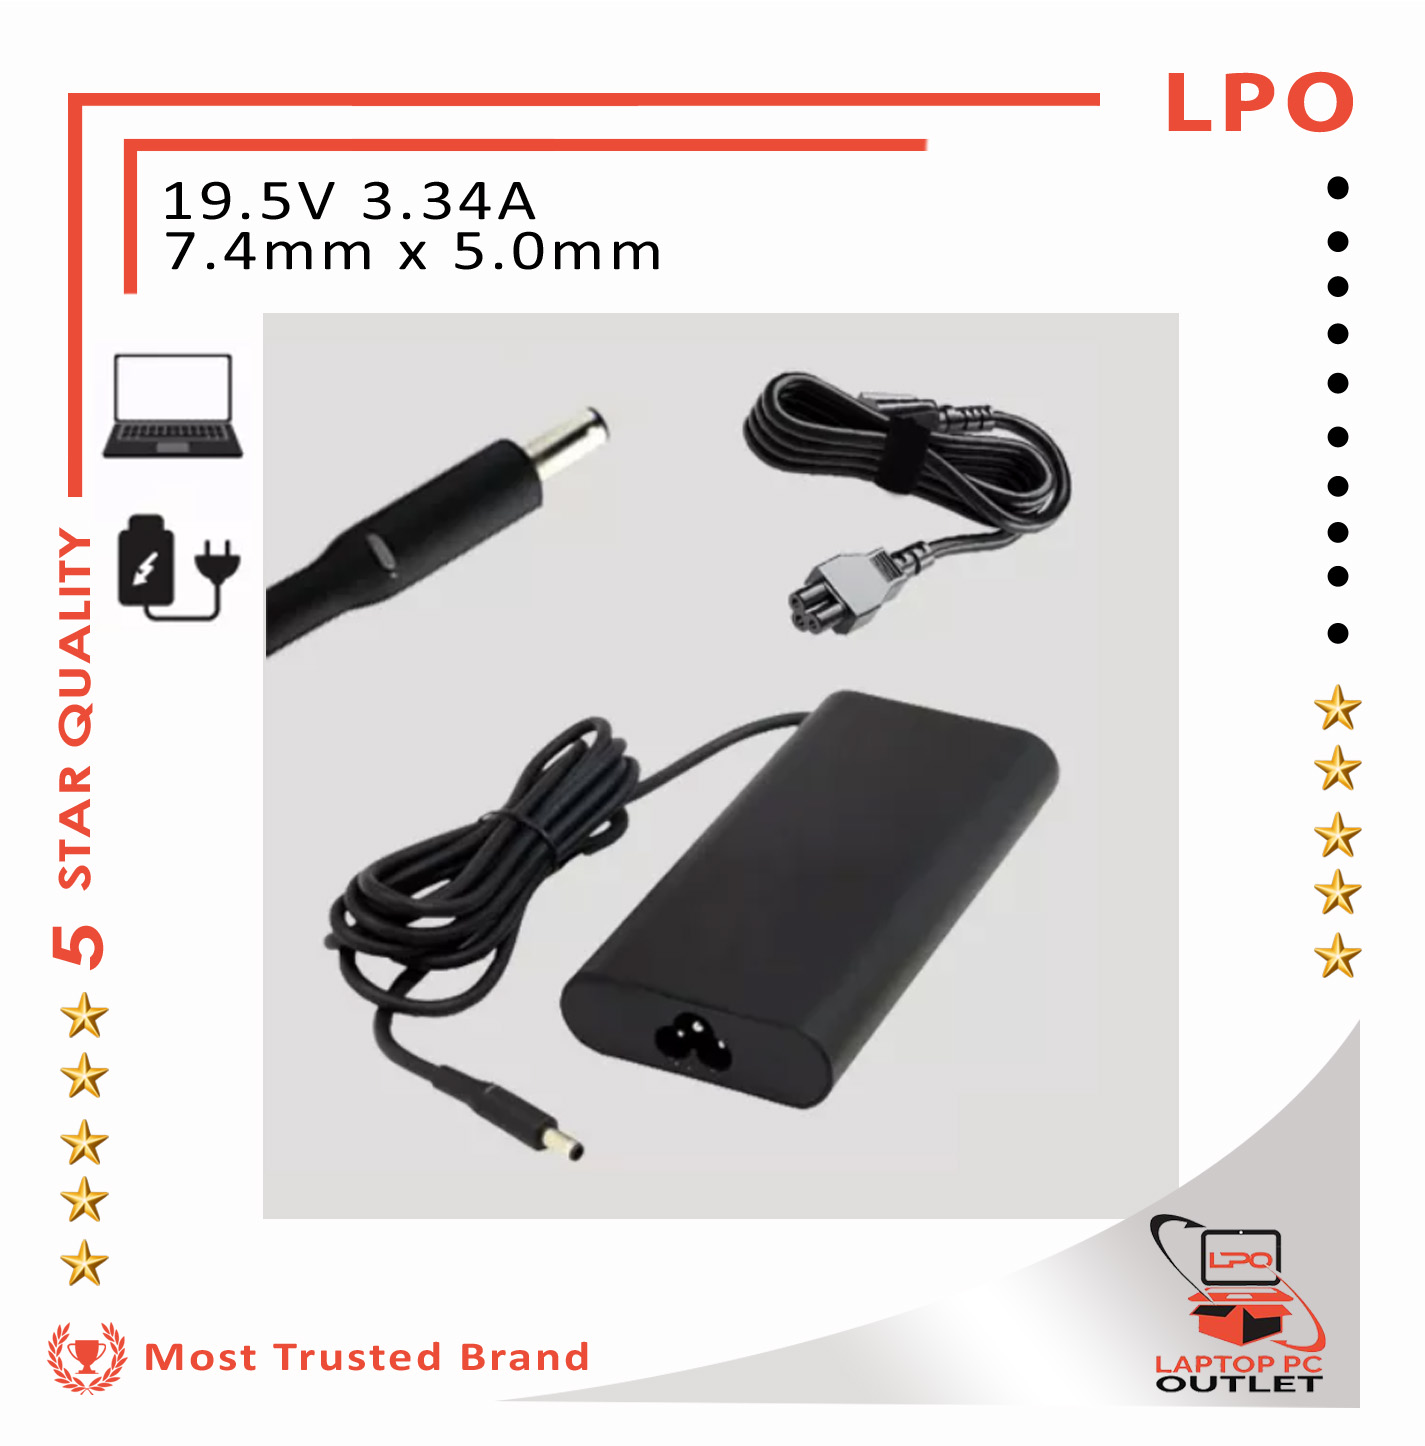 LPO Brand Laptop Charger compatible with Dell    x   Inspiron 14R (5421), Inspiron 14R (5437), Inspiron 14z (5423), Inspiron 15  (3520), Inspiron 15 (3521), Inspiron 15 (3537), Inspiron 15 5000 Series  (5552), Inspiron 15 7000 Series ...